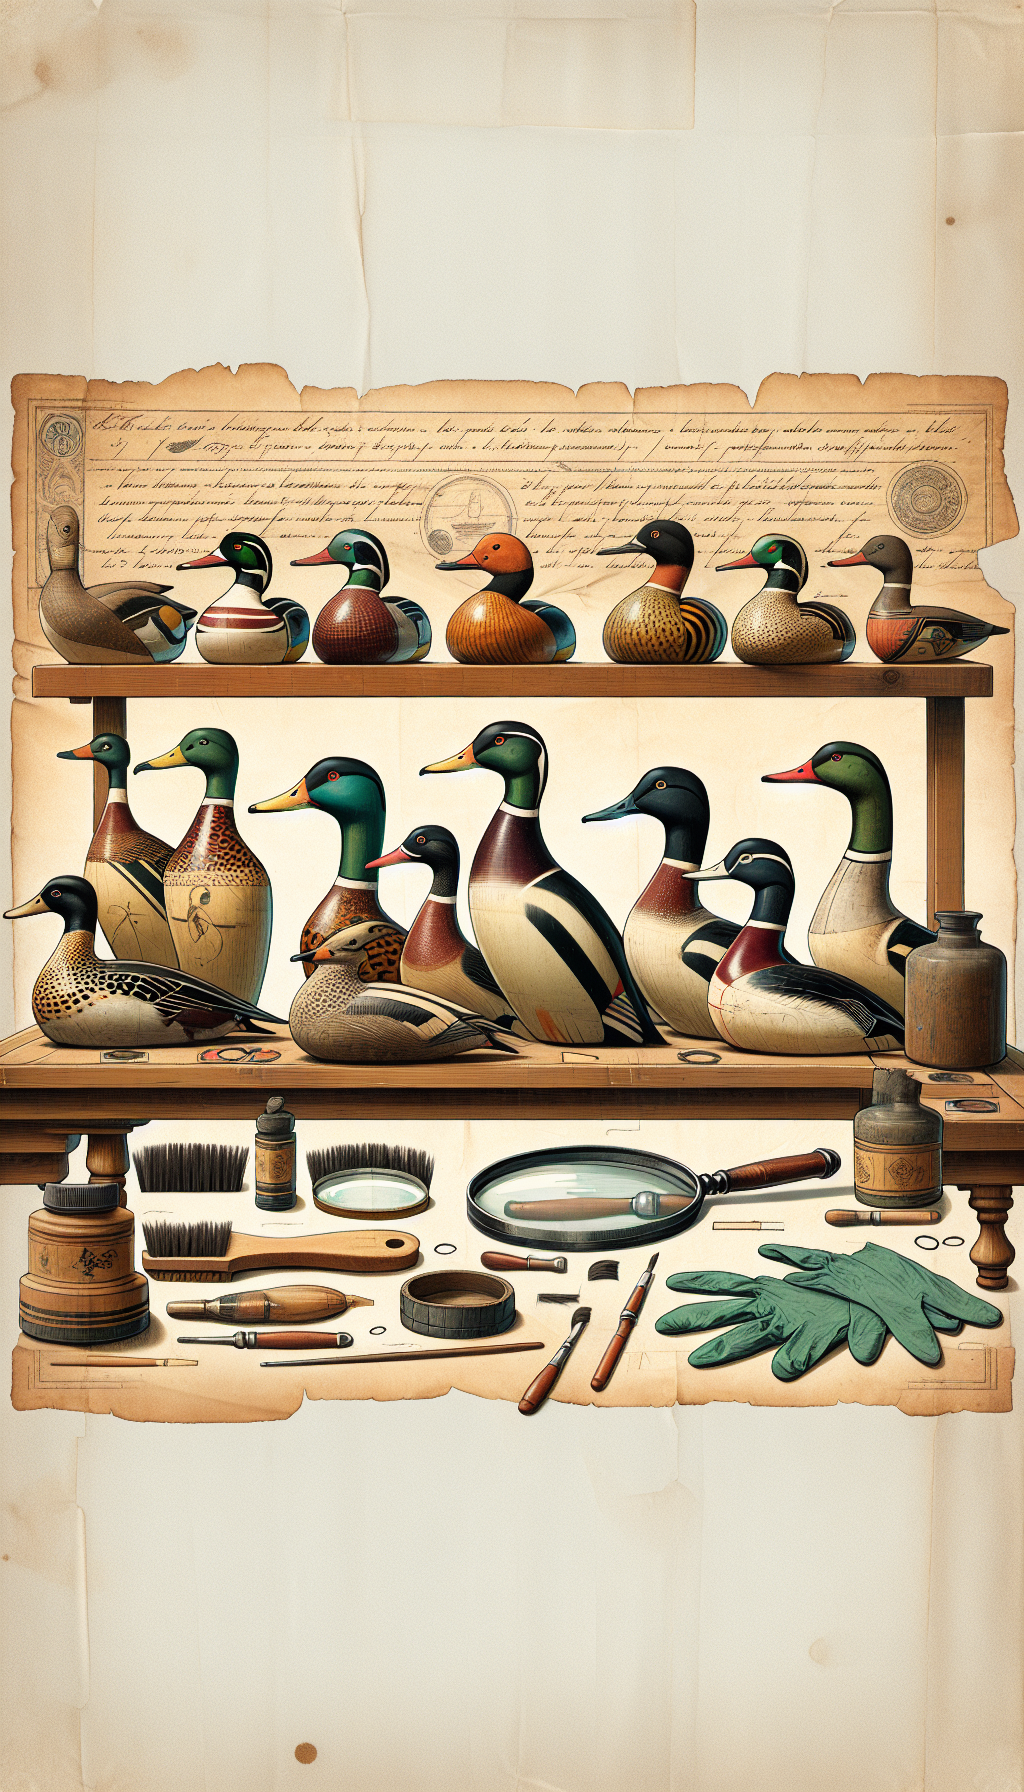 An illustration depicts an array of antique duck decoys on a wooden shelf, each with a magnifying glass overlay highlighting unique features like paint patterns, signatures, or makers' marks. Maintenance tools like brushes and archival gloves rest beside them. A faded parchment in the background lists preservation tips in elegant script, merging history with care instructions.